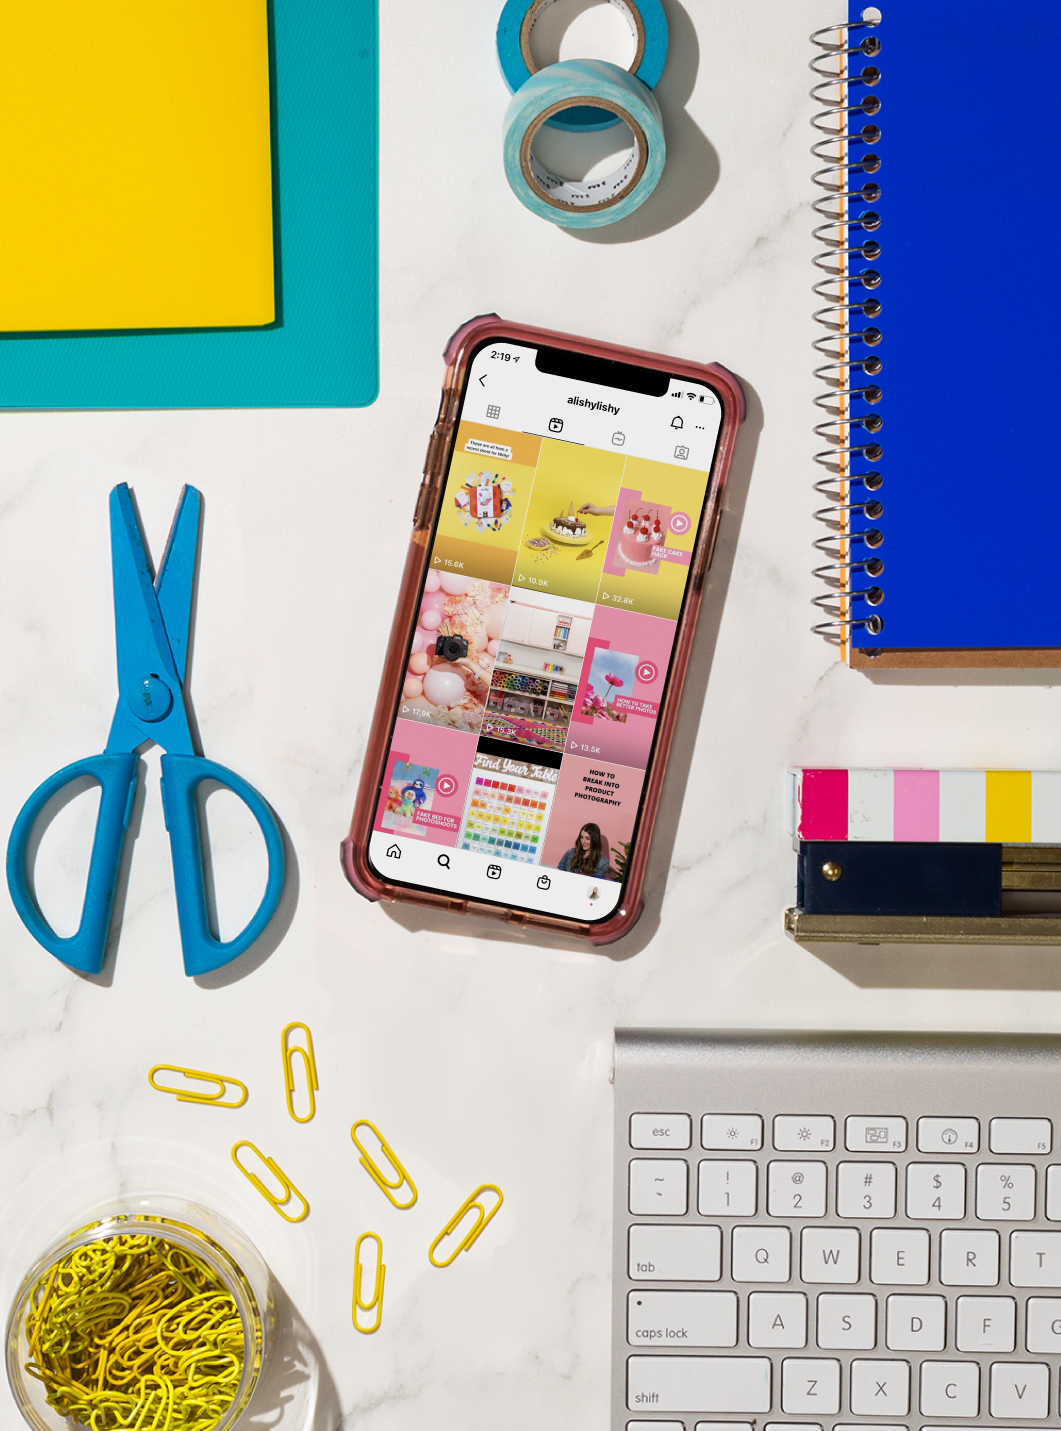 phone with instagram feed on screen laying among office supplies